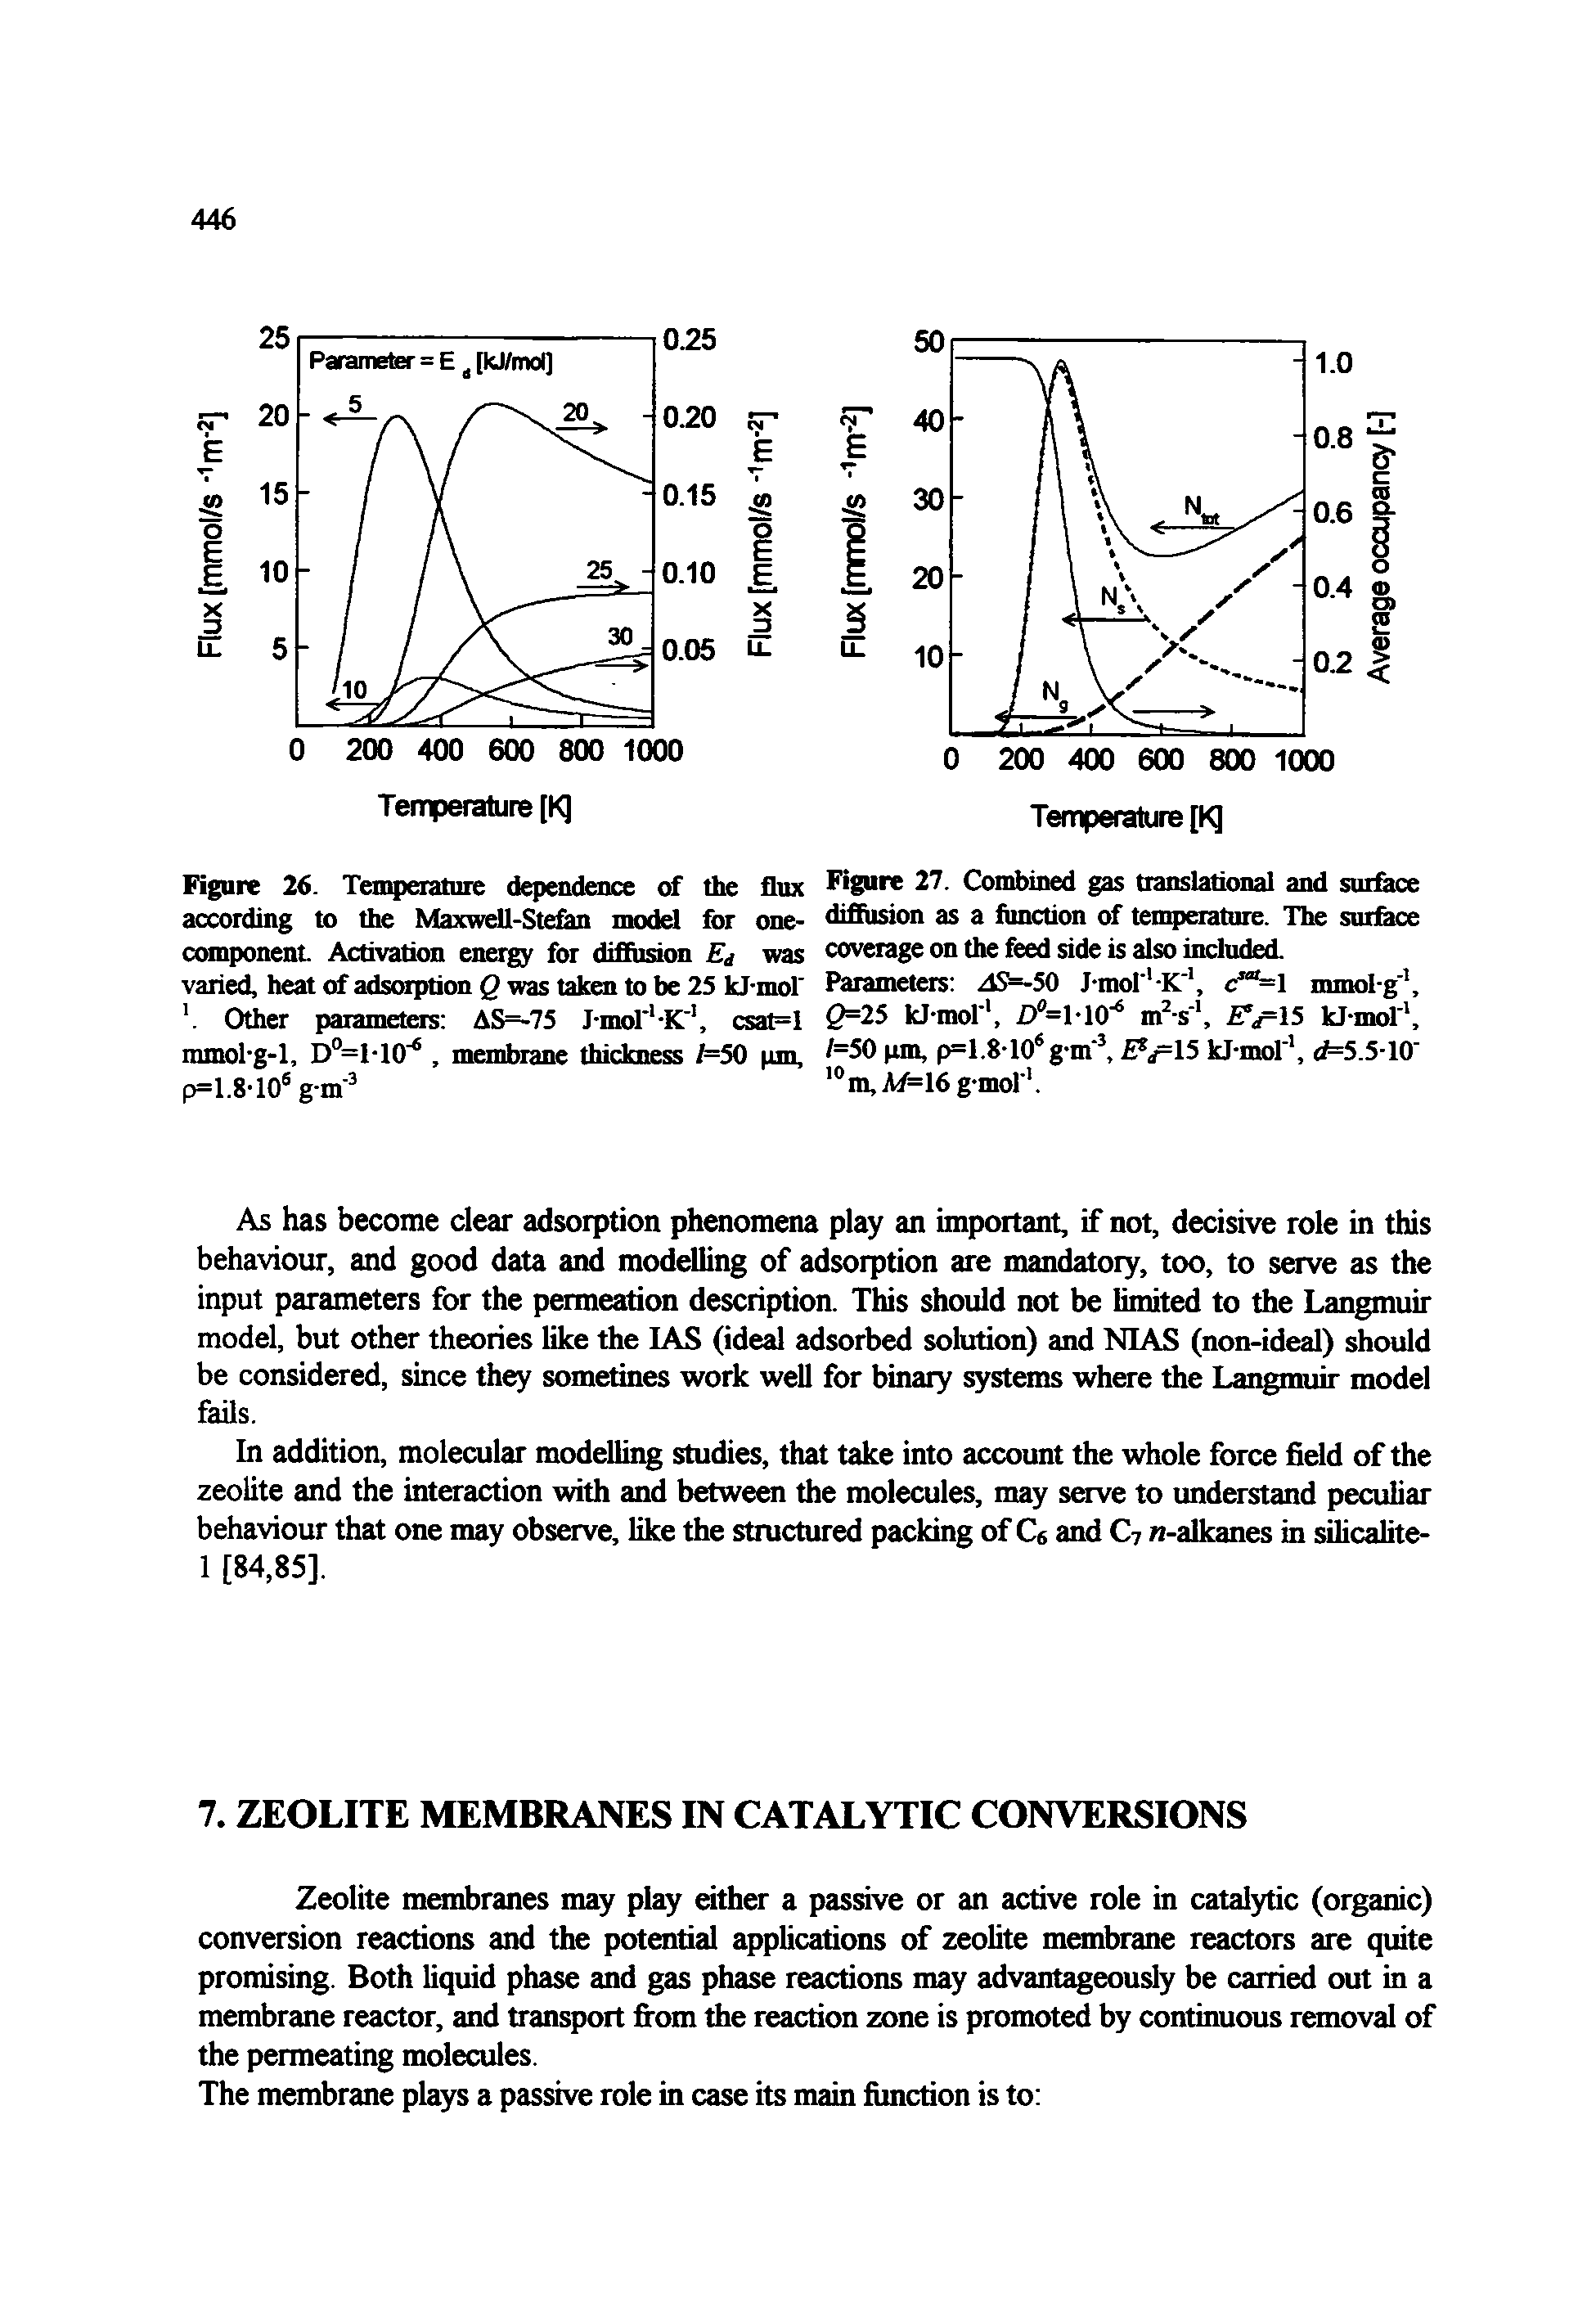 Figure 26. Teinpeiatuie dependence of the flux according to the Maxwell-Stefan model for one-component Activation energy for diffiision Ed was varied, heat of adsorption Q was taken to be 25 kJ-mof Other parameters AS=-75 J-mof -K, csat=l mmol-g-1, D =M0, membrane thickness f=50 pm,...